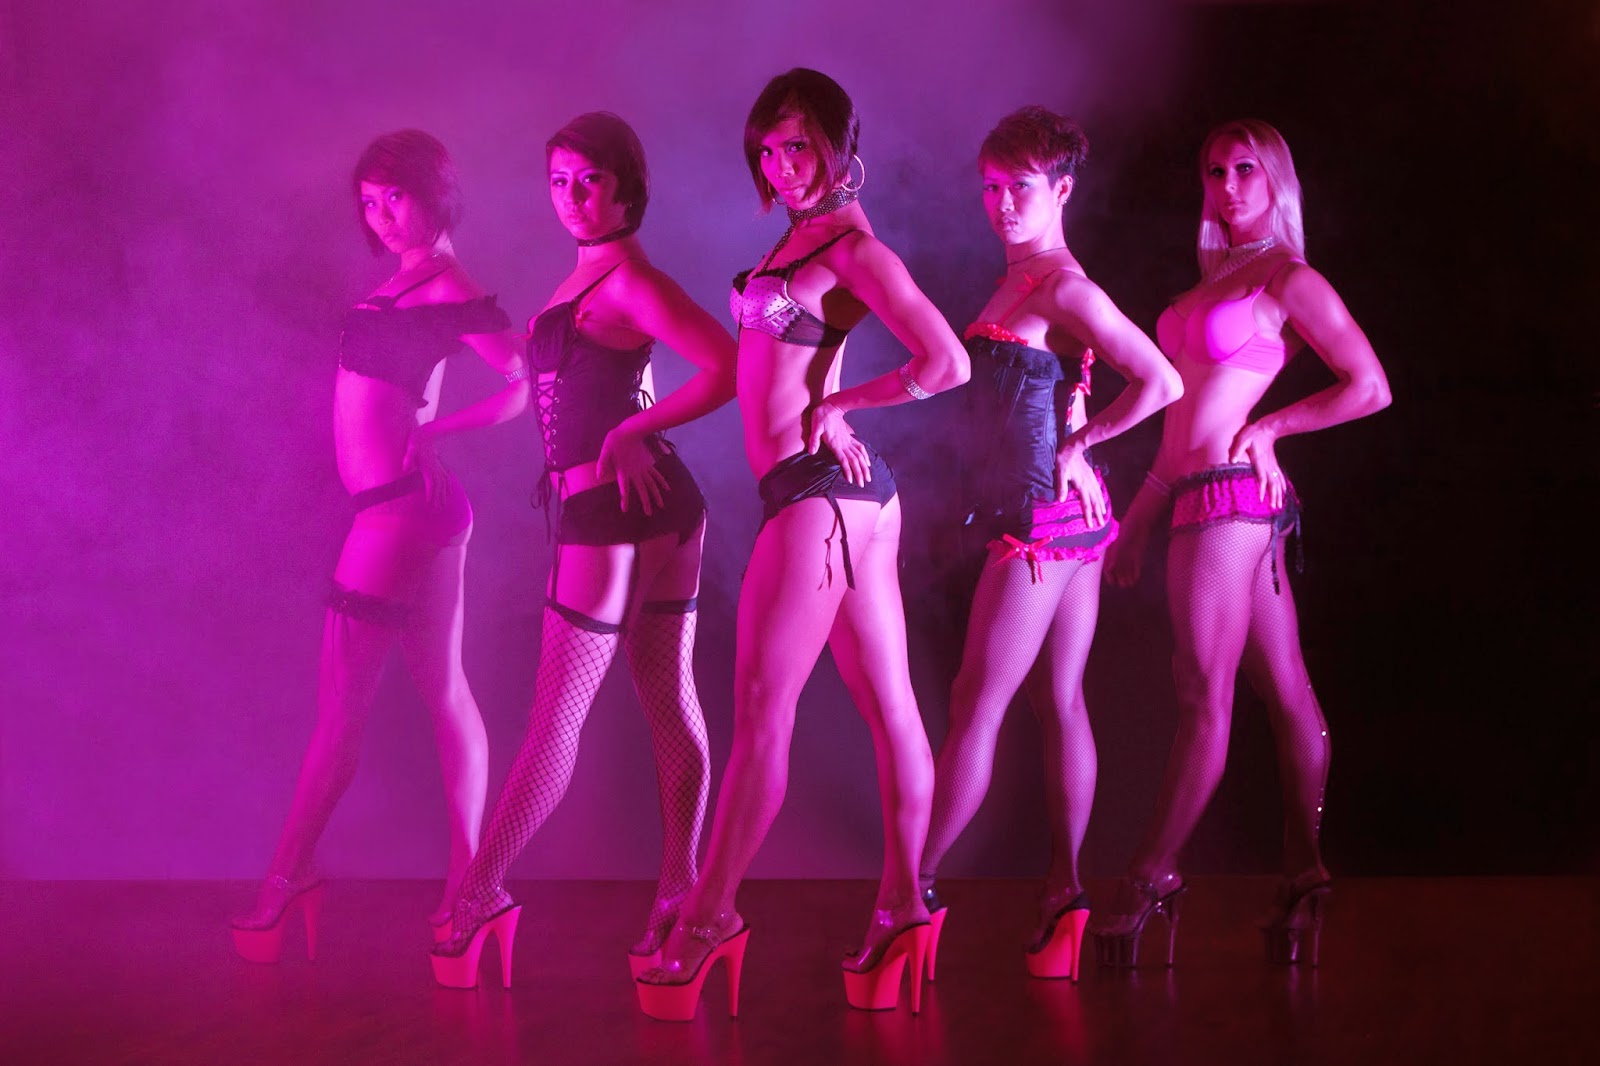 Japanese strippers